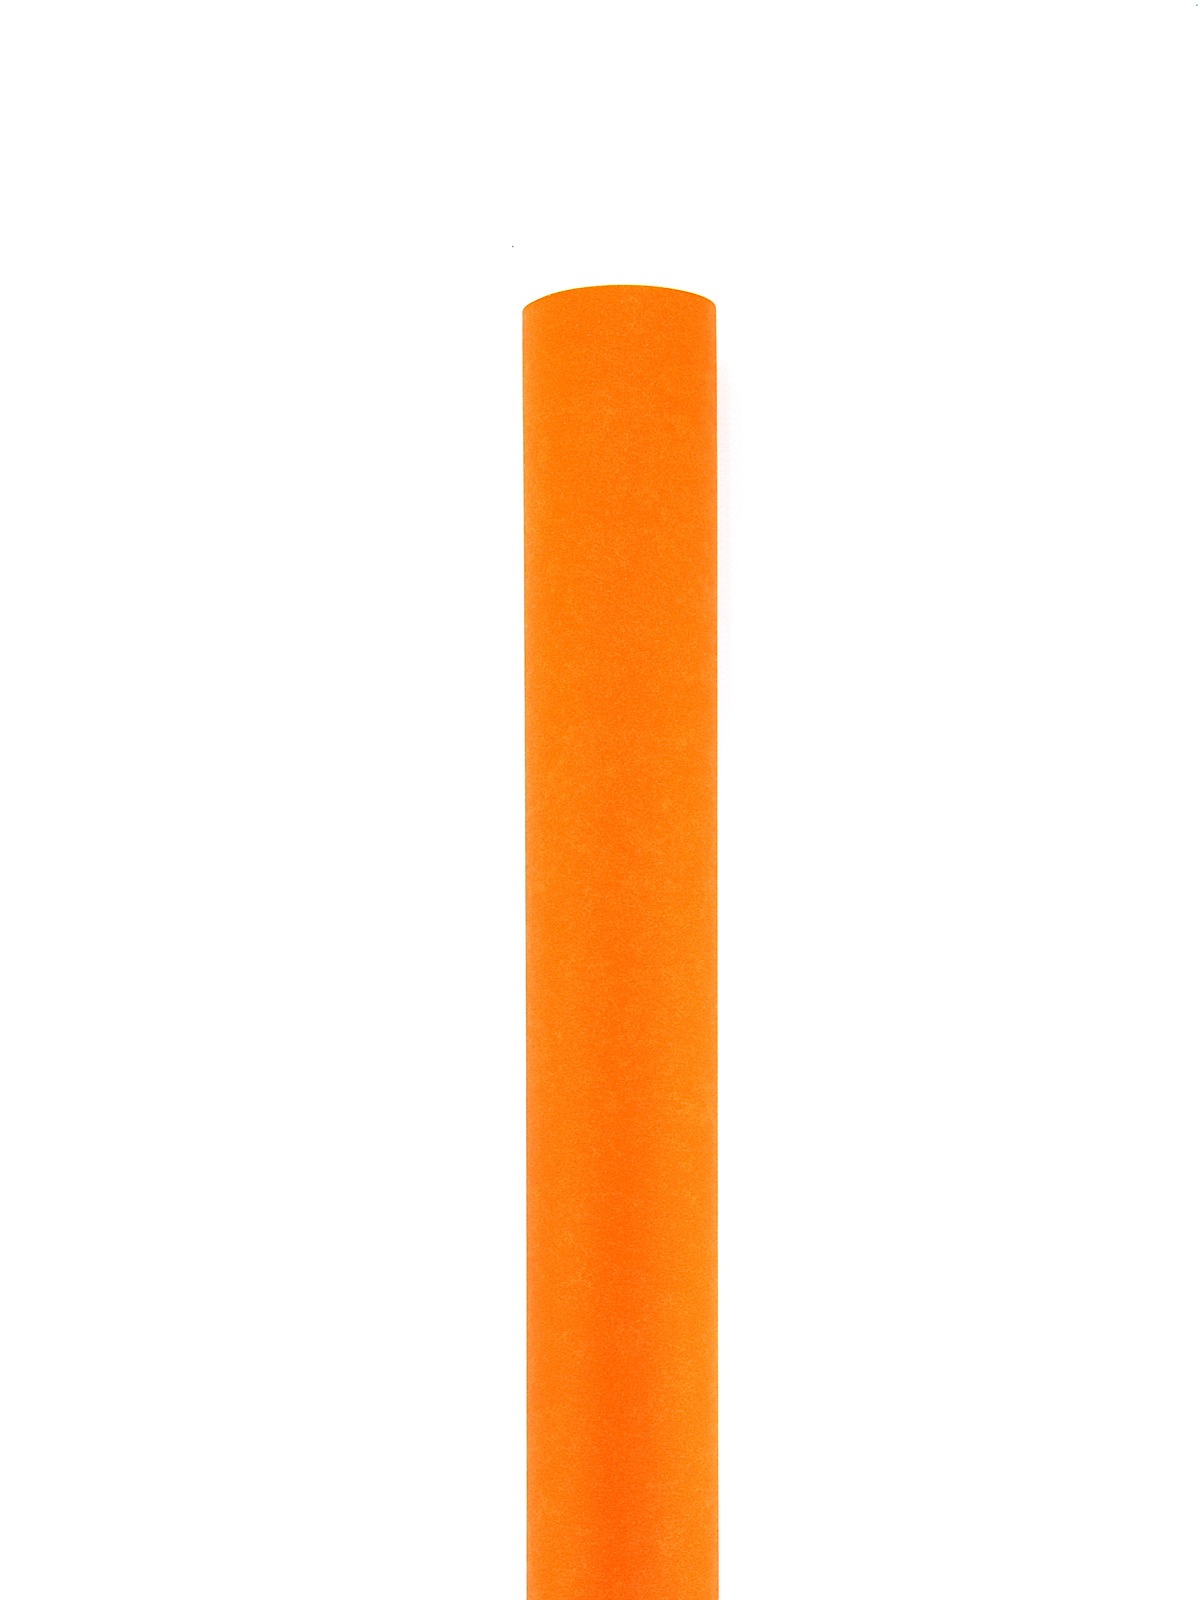 Fadeless Colored Paper Rolls Orange 24 In. X 12 Ft.